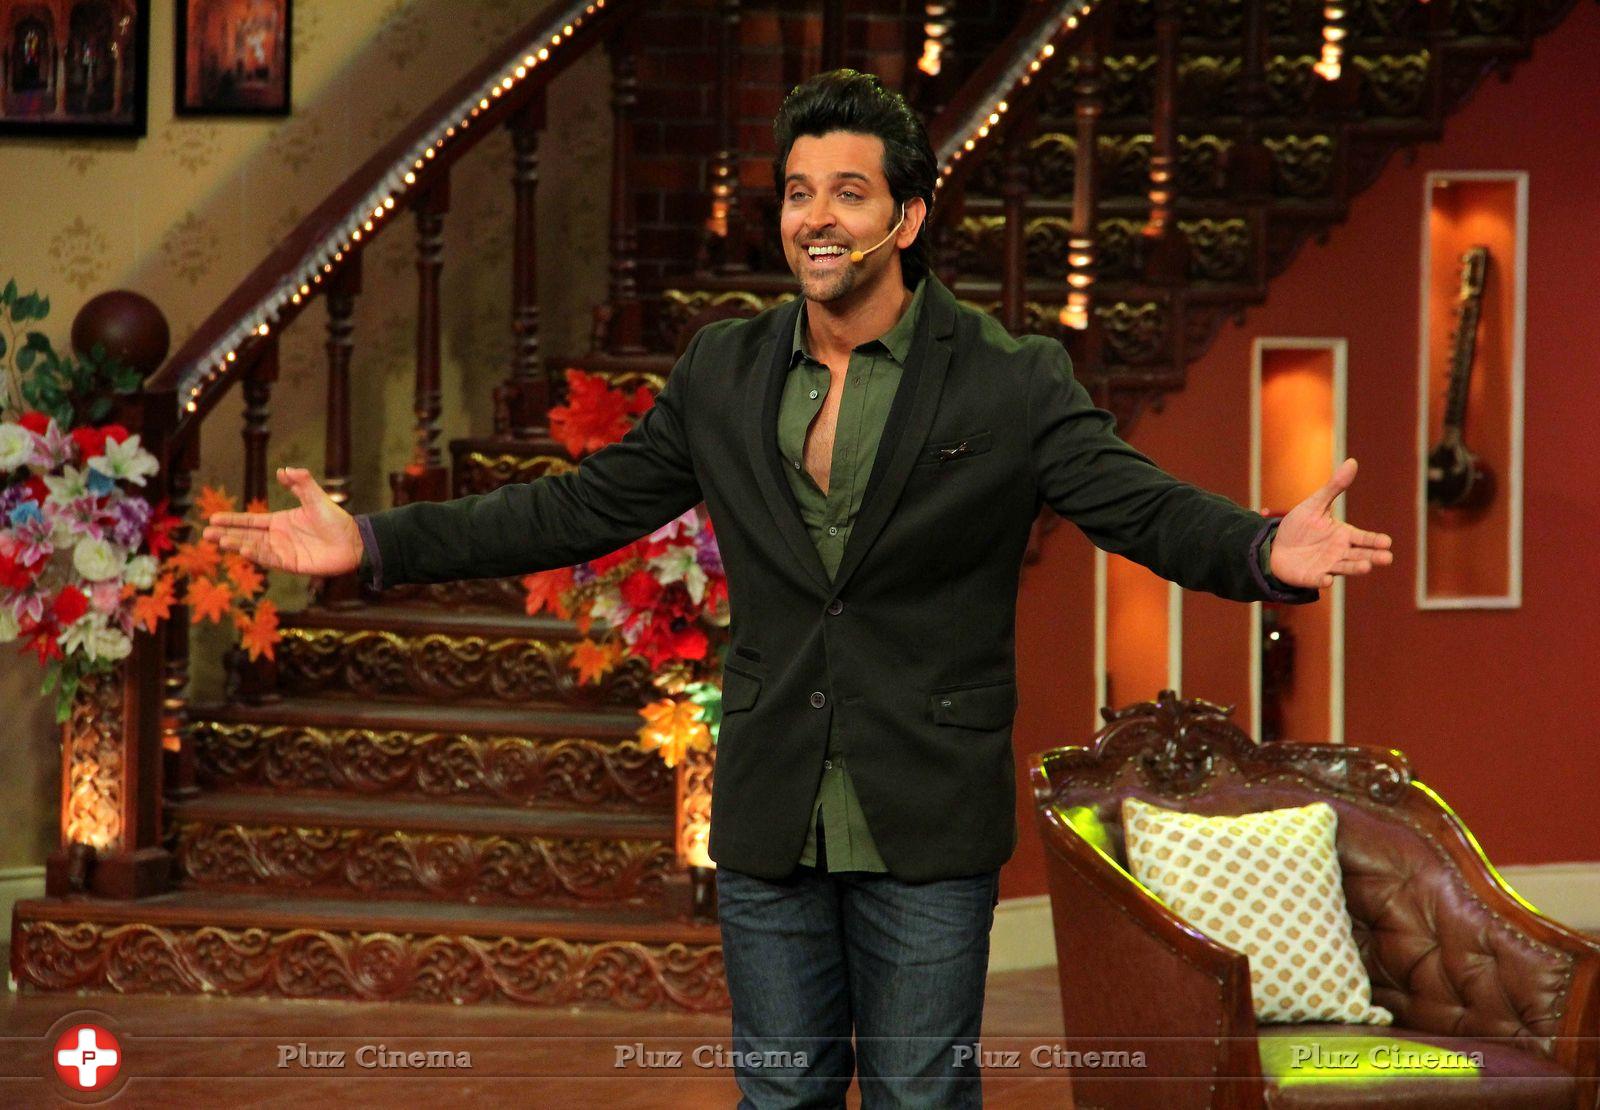 Hrithik Roshan - Hrithik Roshan Promotes Krrish 3 On the Sets Of Comedy Nights With Kapil Photos | Picture 611806